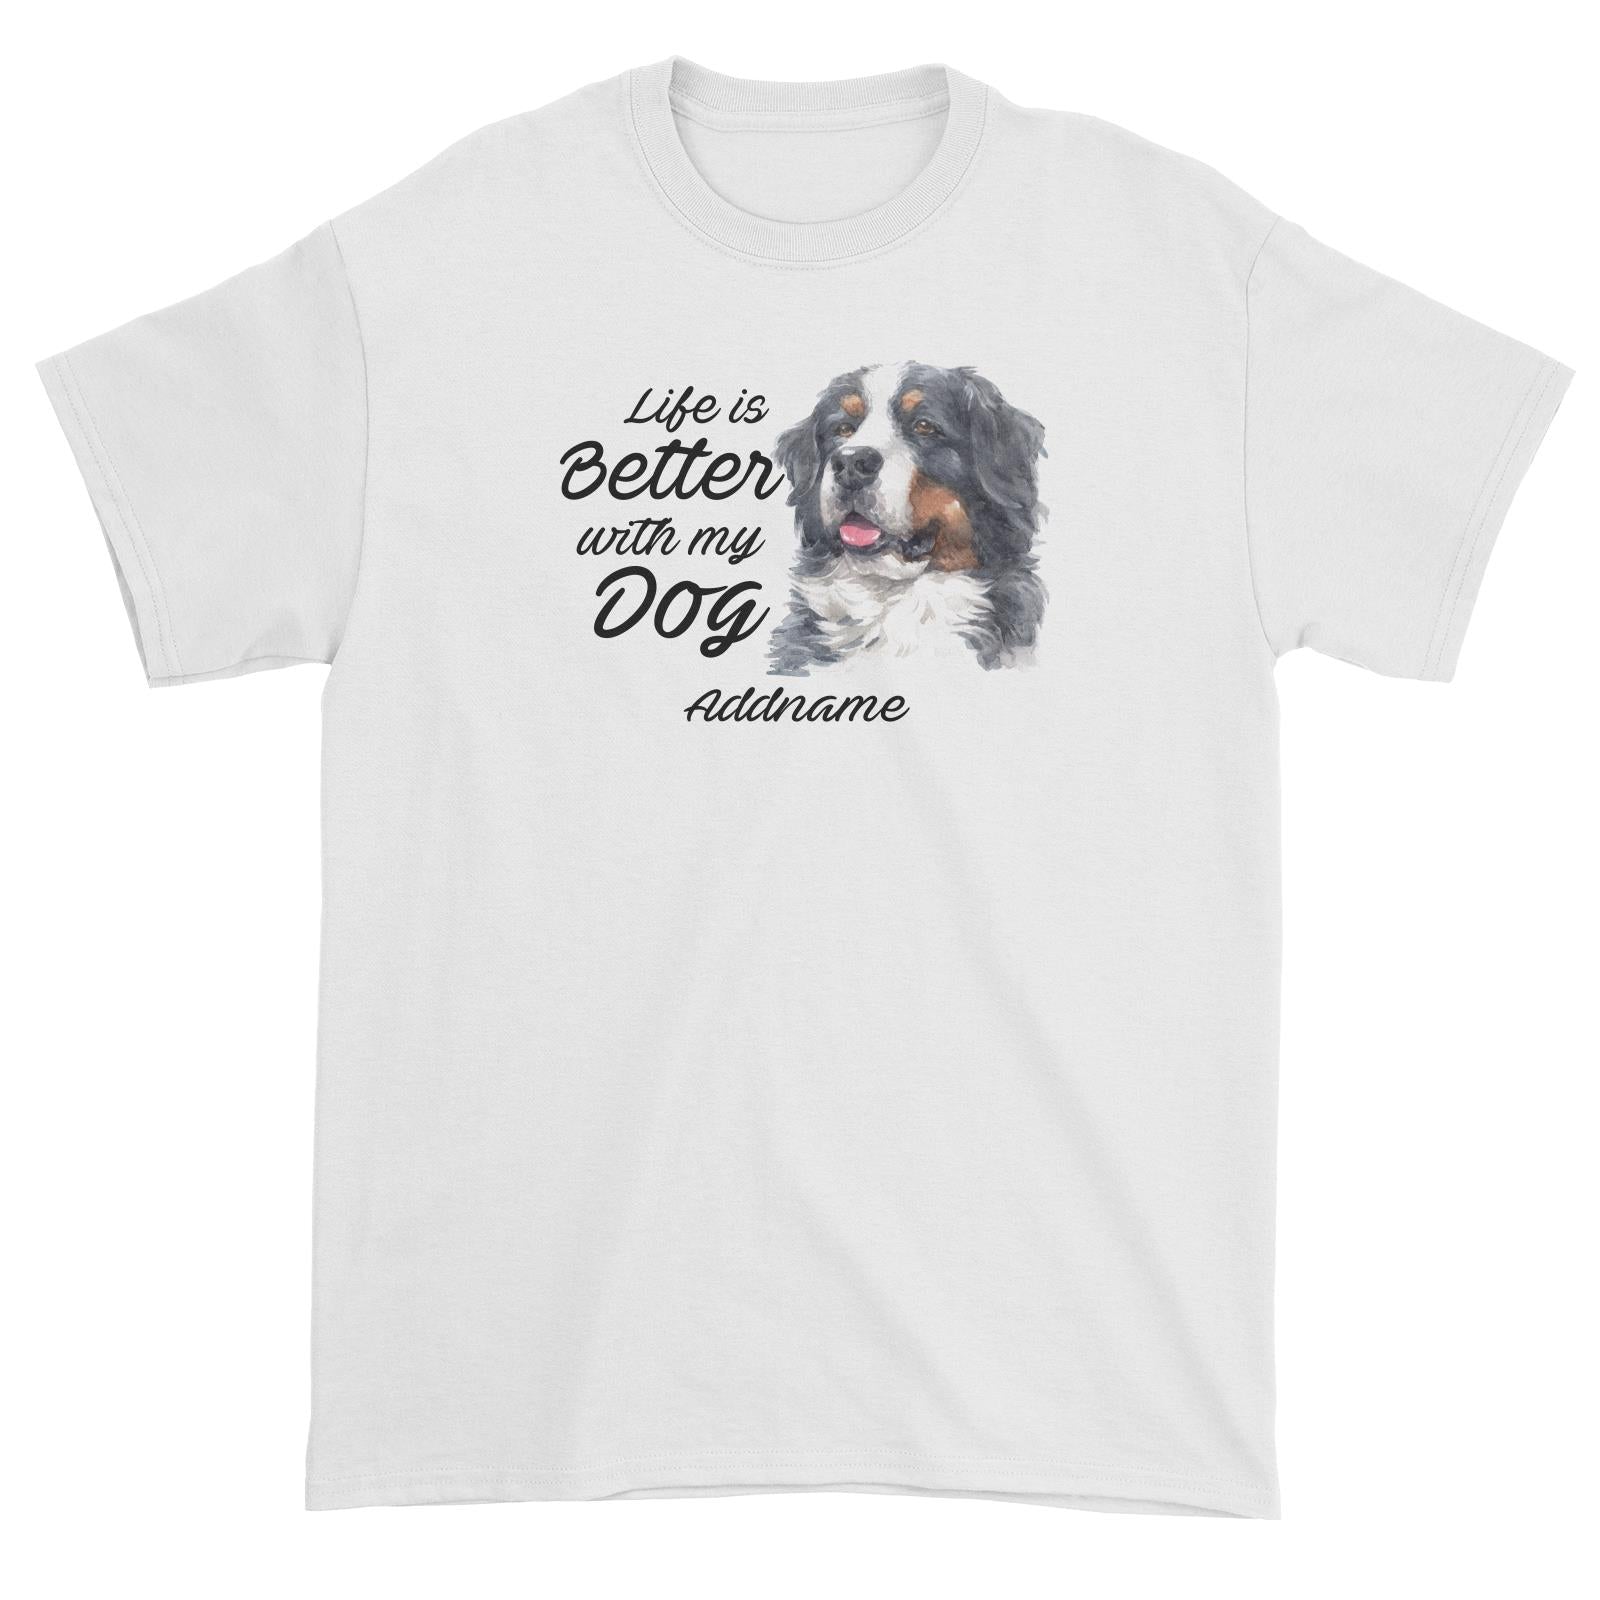 Watercolor Life is Better With My Dog Bernese Mountain Dog Addname Unisex T-Shirt